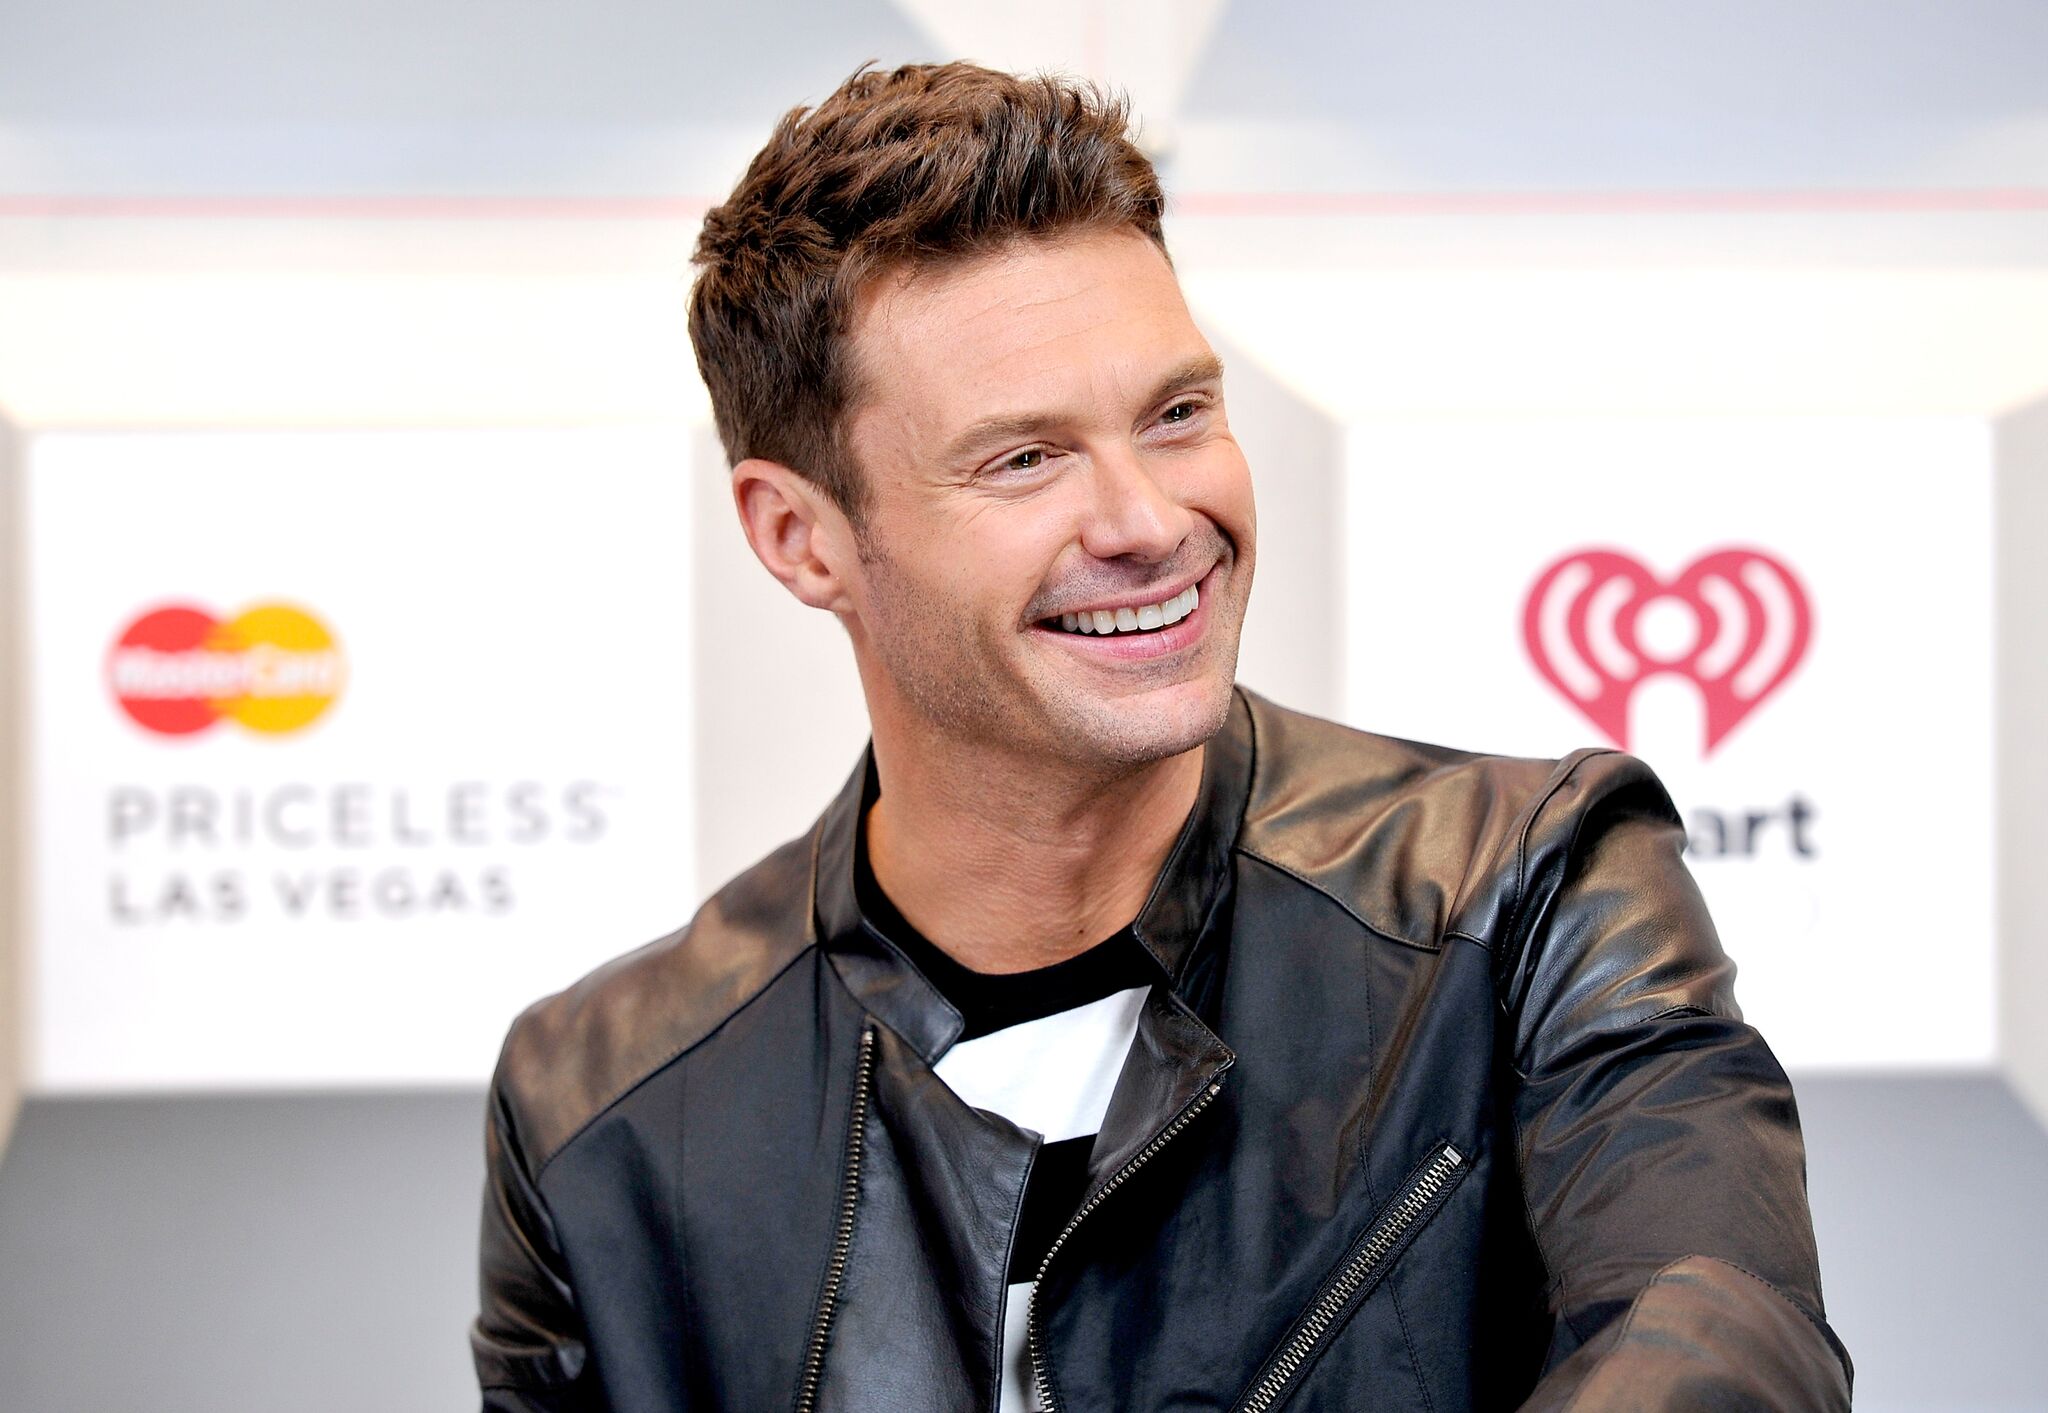 Ryan Seacrest attends the 2014 iHeartRadio Music Festival at the MGM Grand Garden Arena  | Getty Images